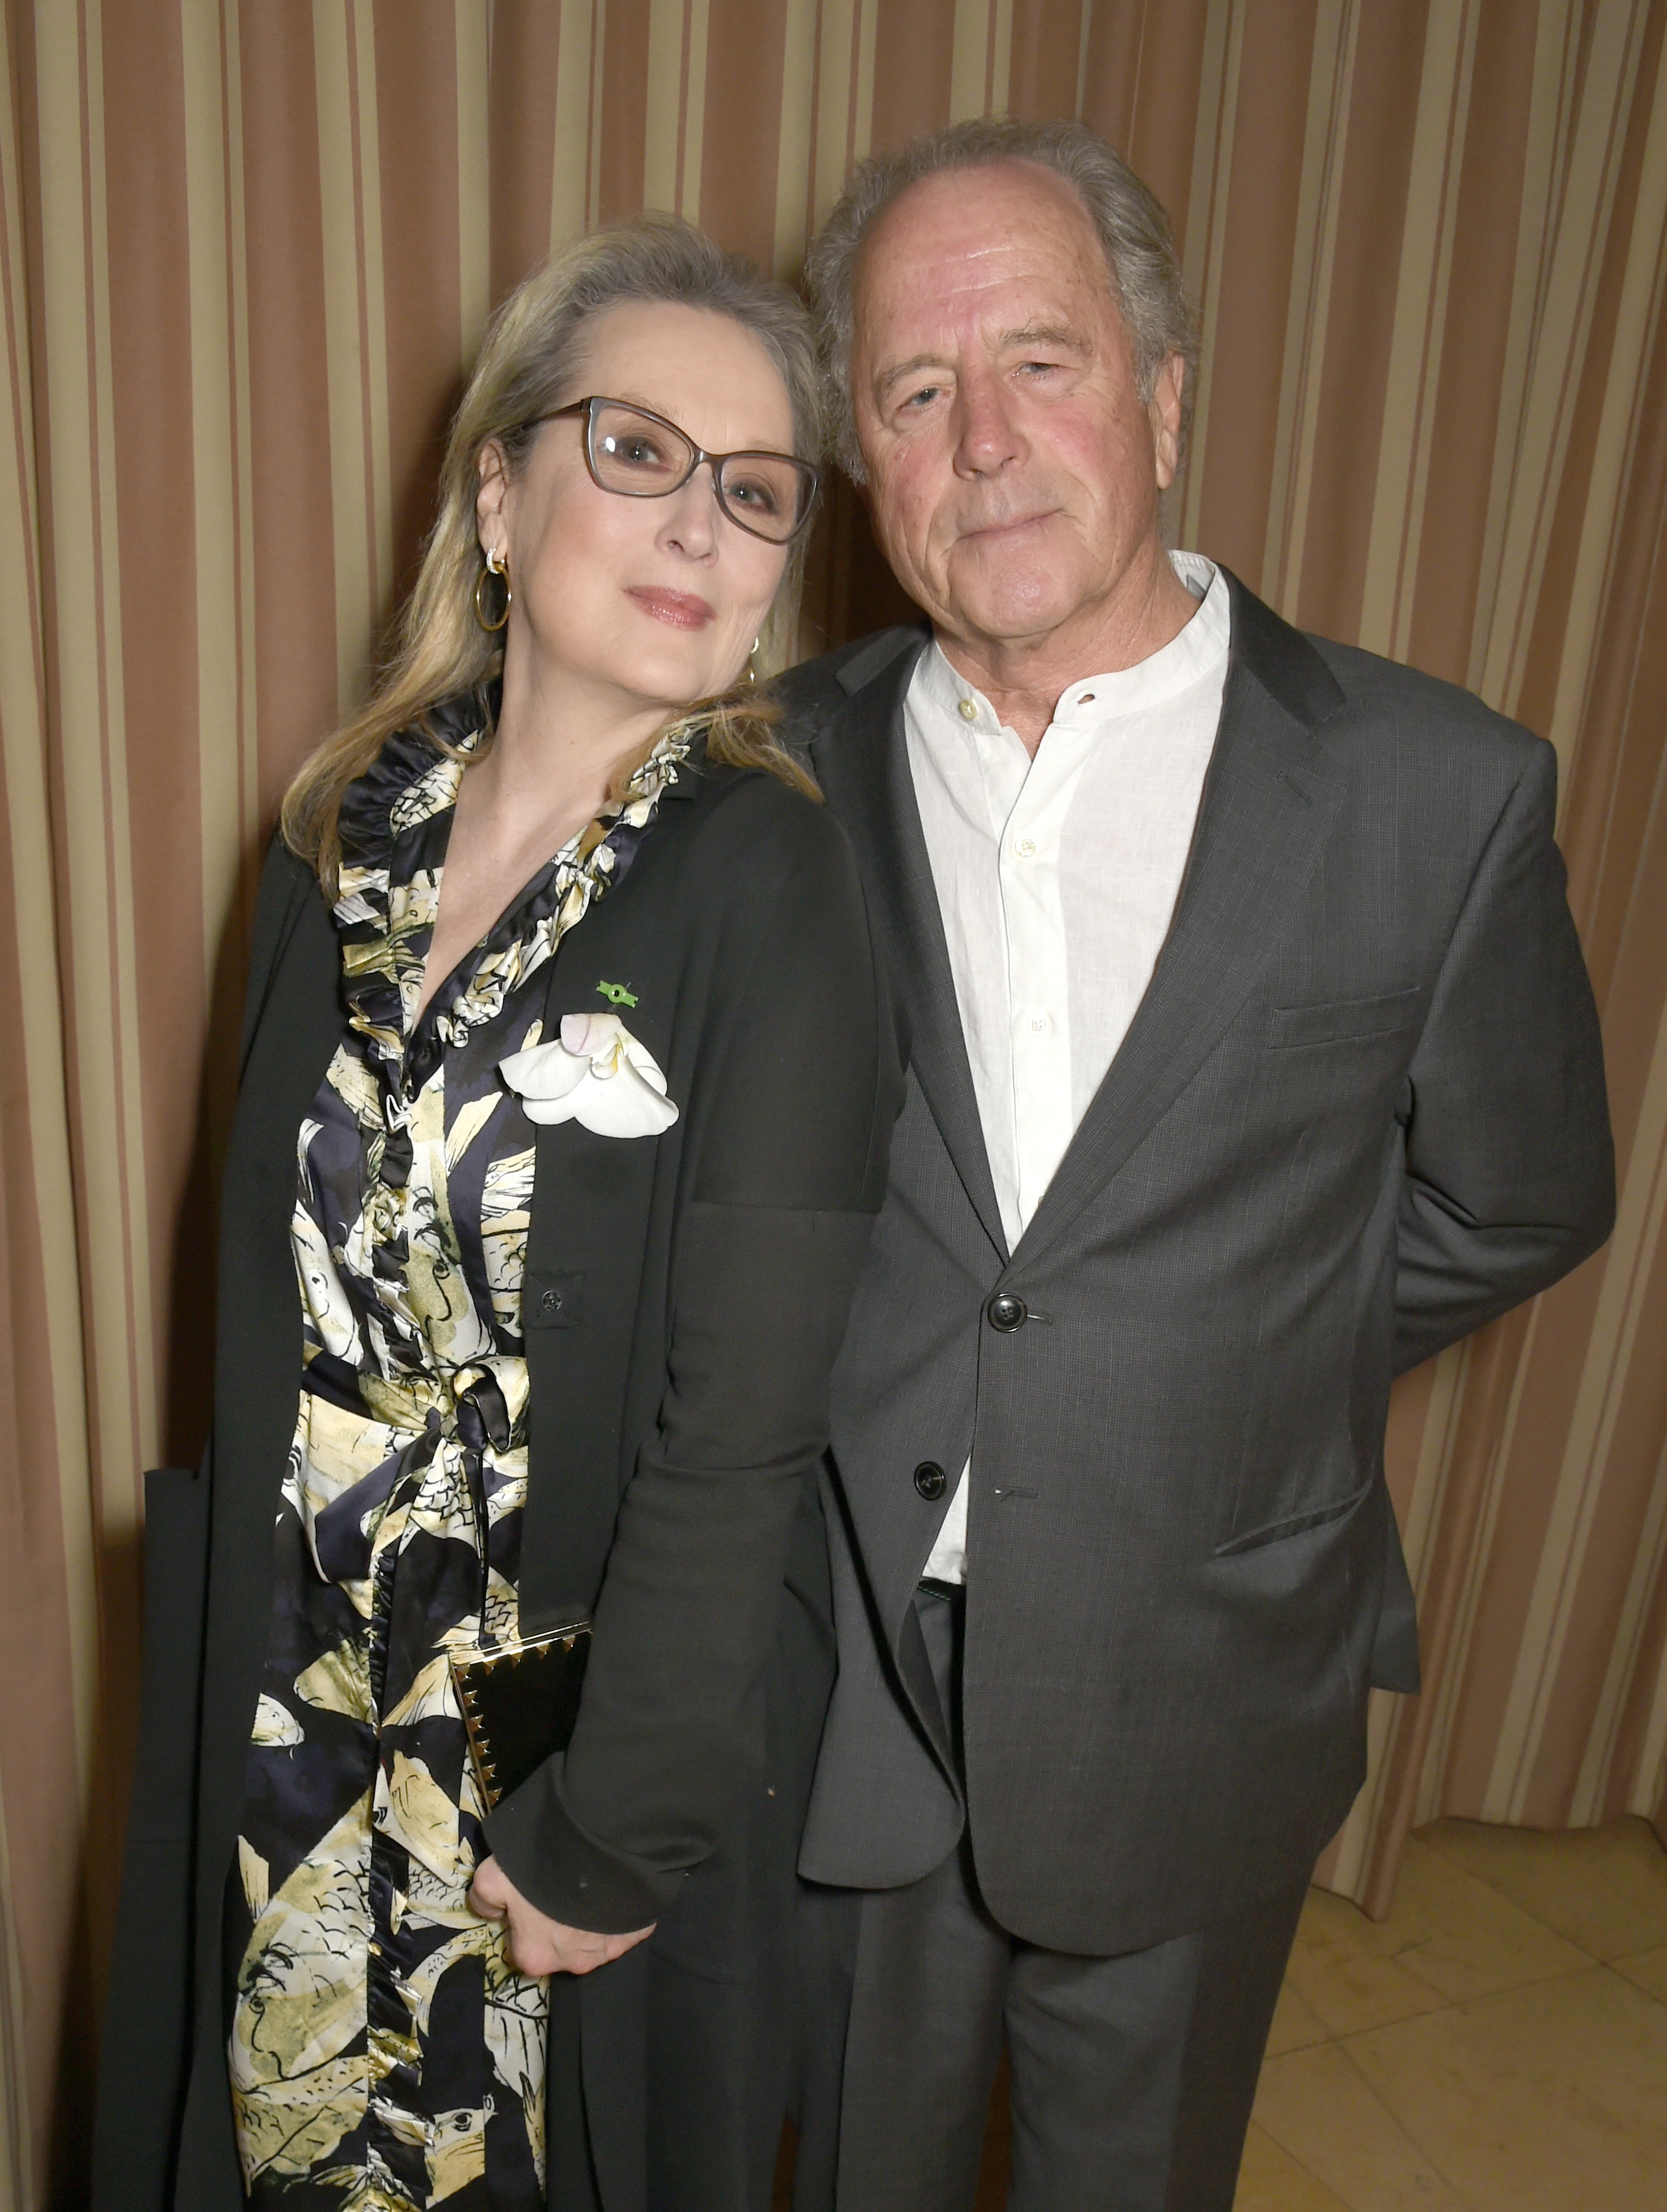 Meryl Streep and Don Gummer attend a dinner to celebrate The GCC and The Journey To Sustainable Luxury in Los Angeles, California, on February 24, 2017. | Source: Getty Images